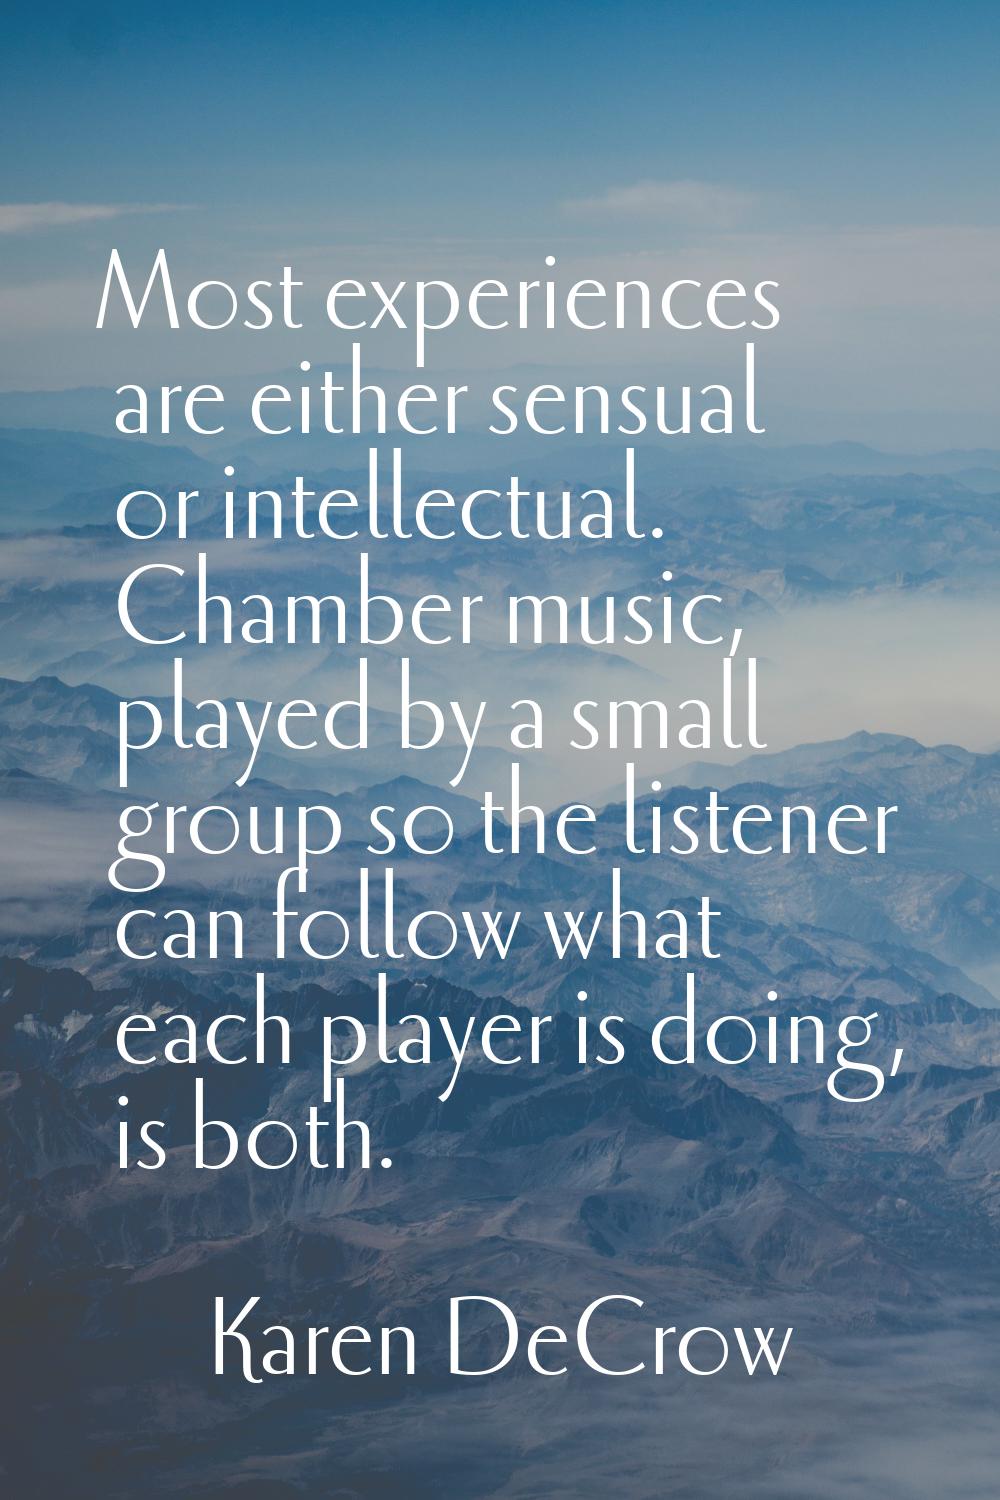 Most experiences are either sensual or intellectual. Chamber music, played by a small group so the 